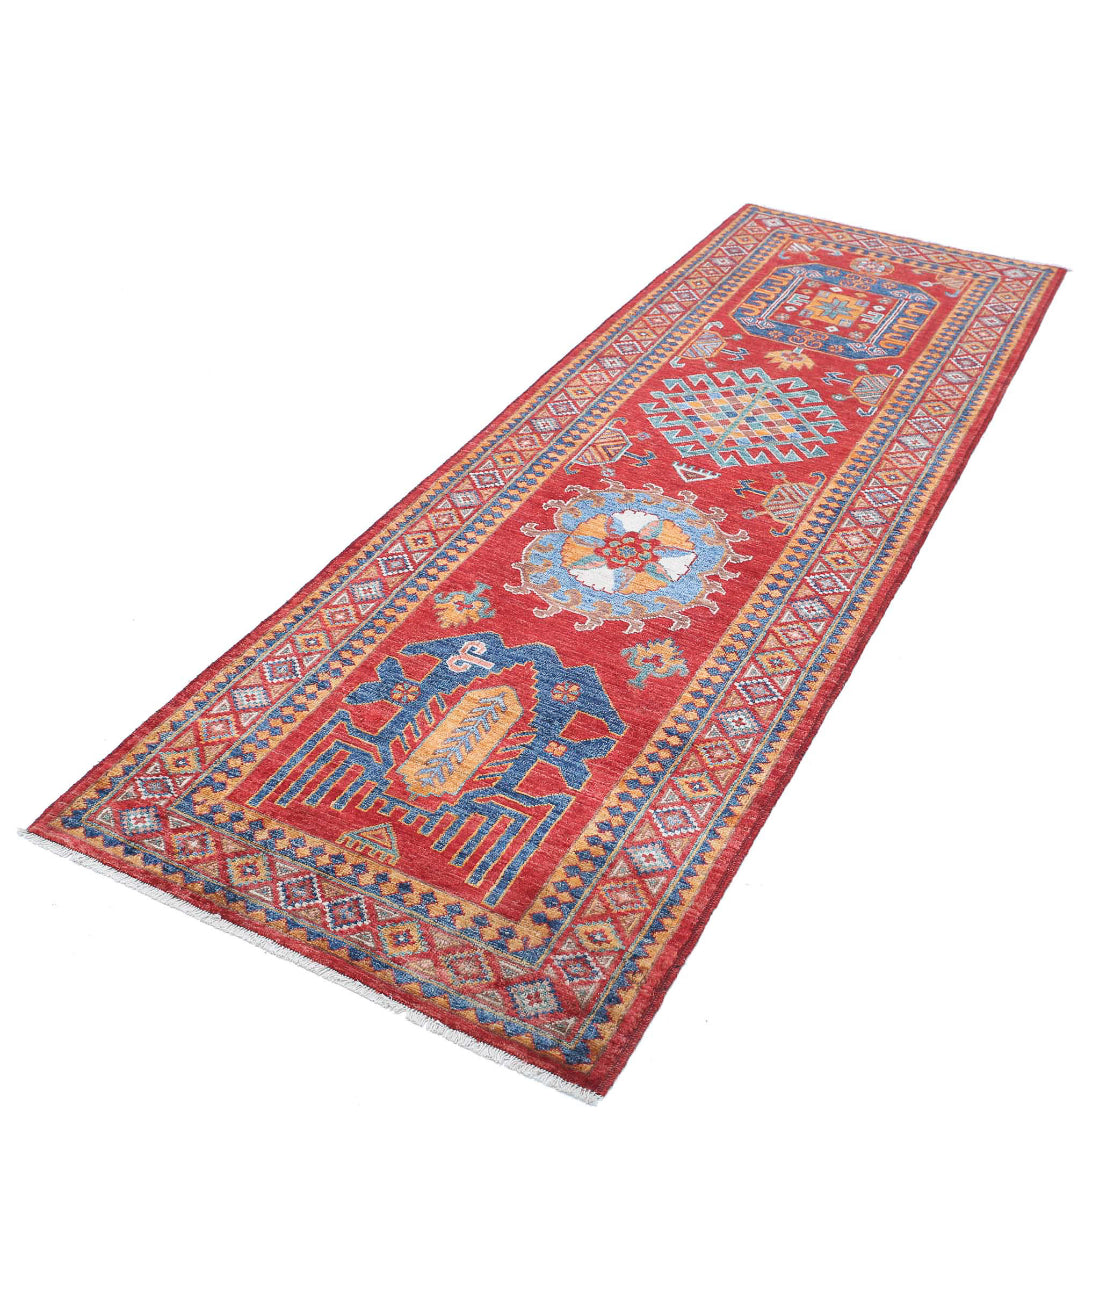 Hand Knotted Nomadic Caucasian Humna Wool Rug - 2'10'' x 8'3'' 2'10'' x 8'3'' (85 X 248) / Red / Blue